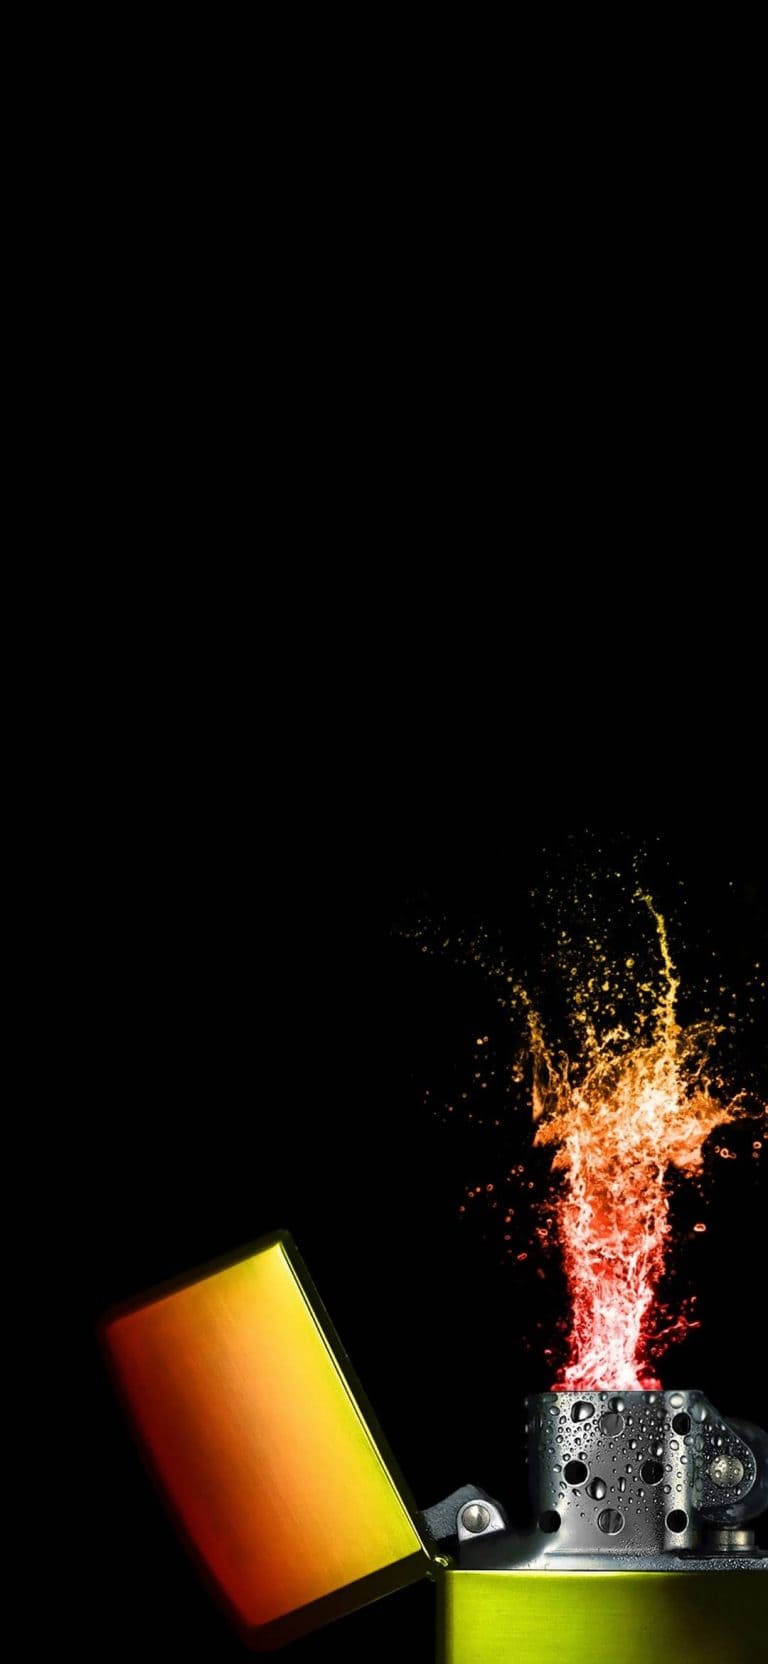 AMOLED Android Fire Lighter Wallpaper